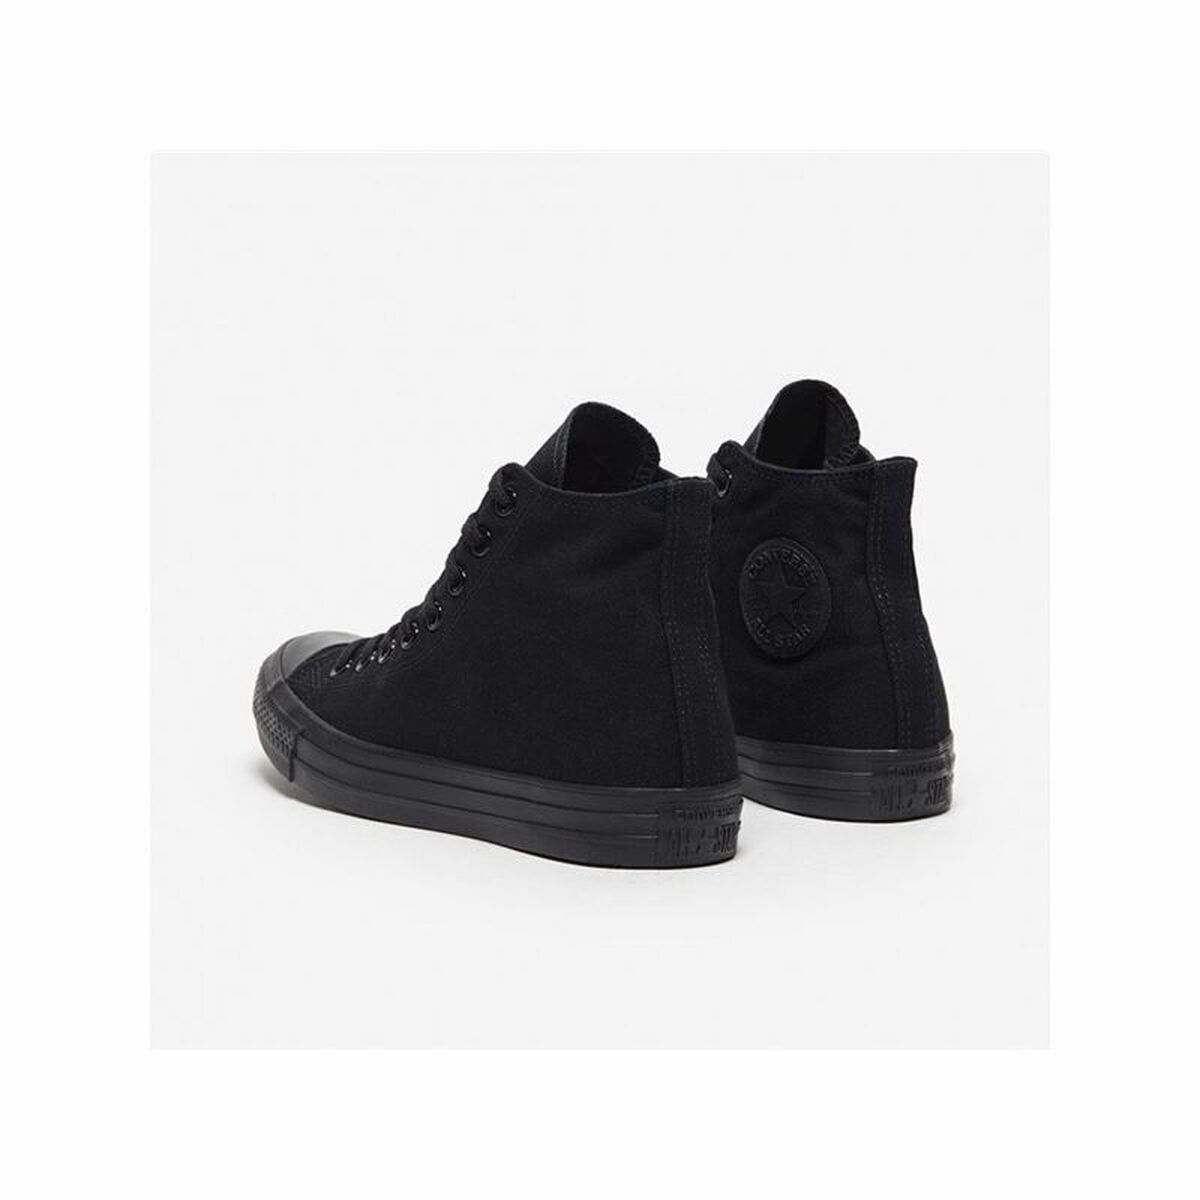 Unisex Casual Trainers Converse Chuck Taylor All Star Black